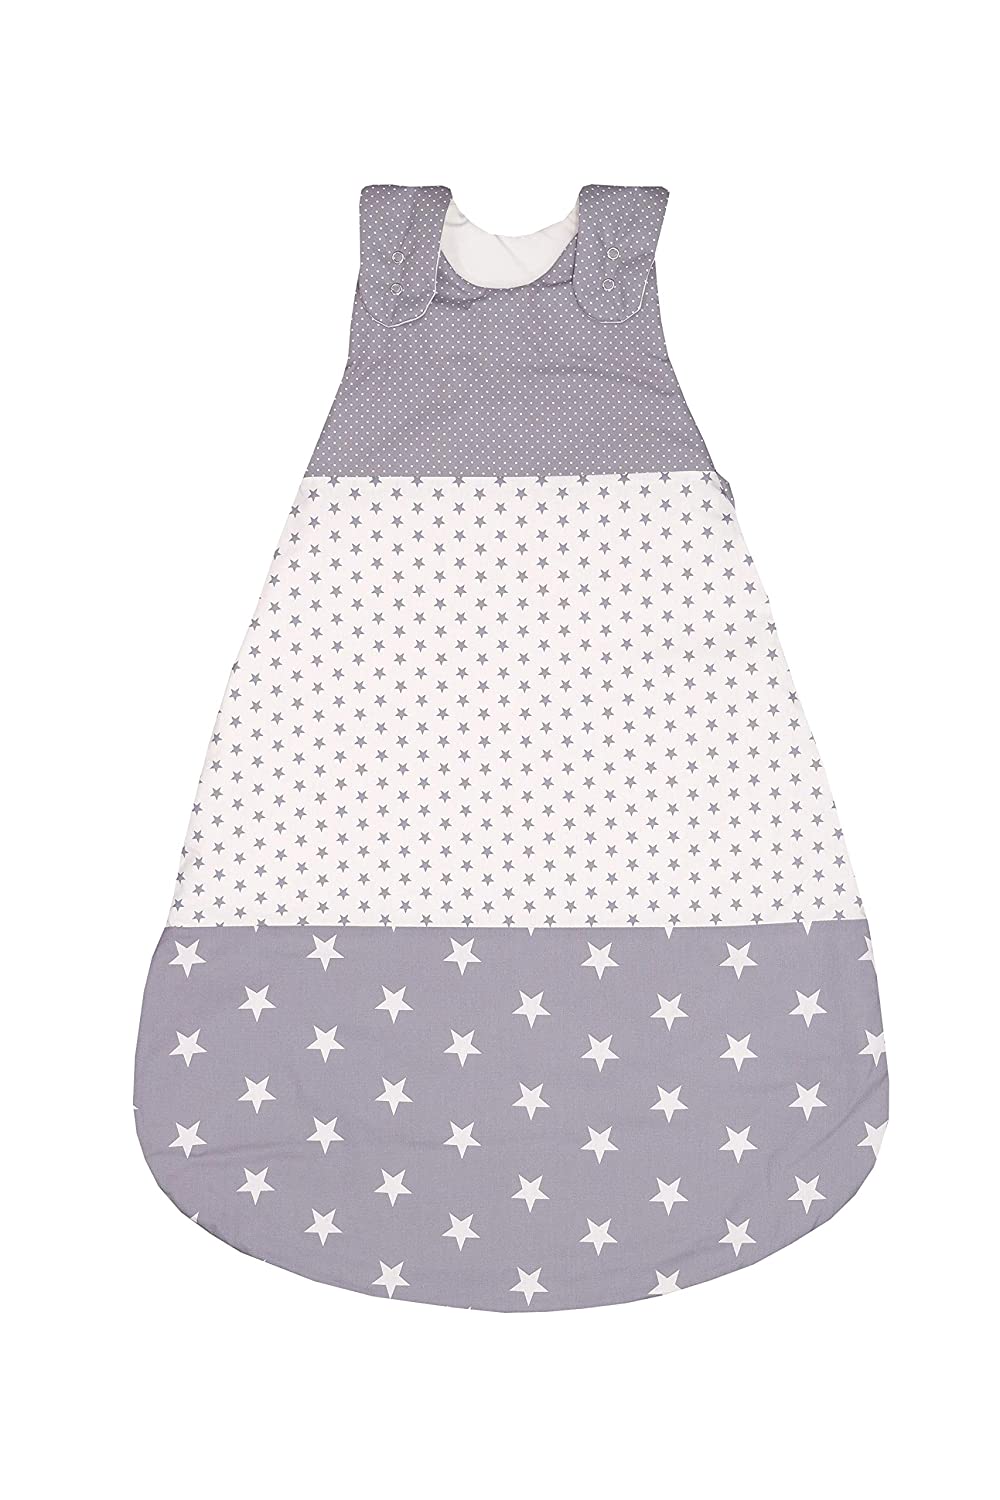 Ullenboom ® Baby Sleeping Bag 10 To 18 Months (Size 80/86) Grey Stars (Made